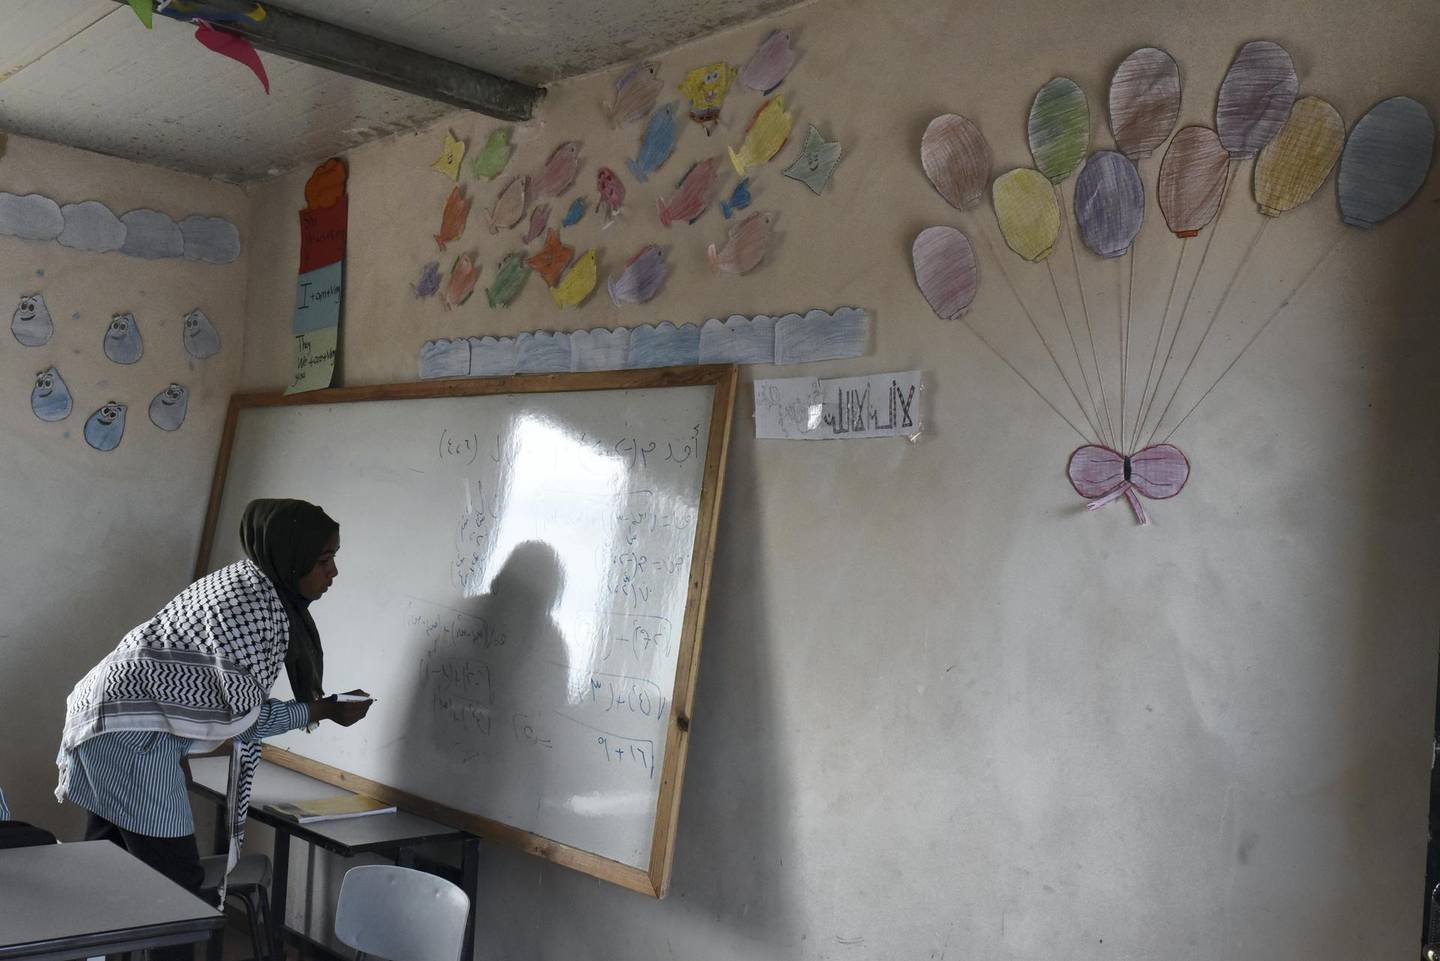 Noor Abu Rasheed, writes an equation on the board. The 14-year-old said maths is her favourite subject and her grades have improved since the Ras a-Tin school opened, in Ras a-Tin, north-east of Ramallah in the occupied West Bank. Rose Scammell for The National